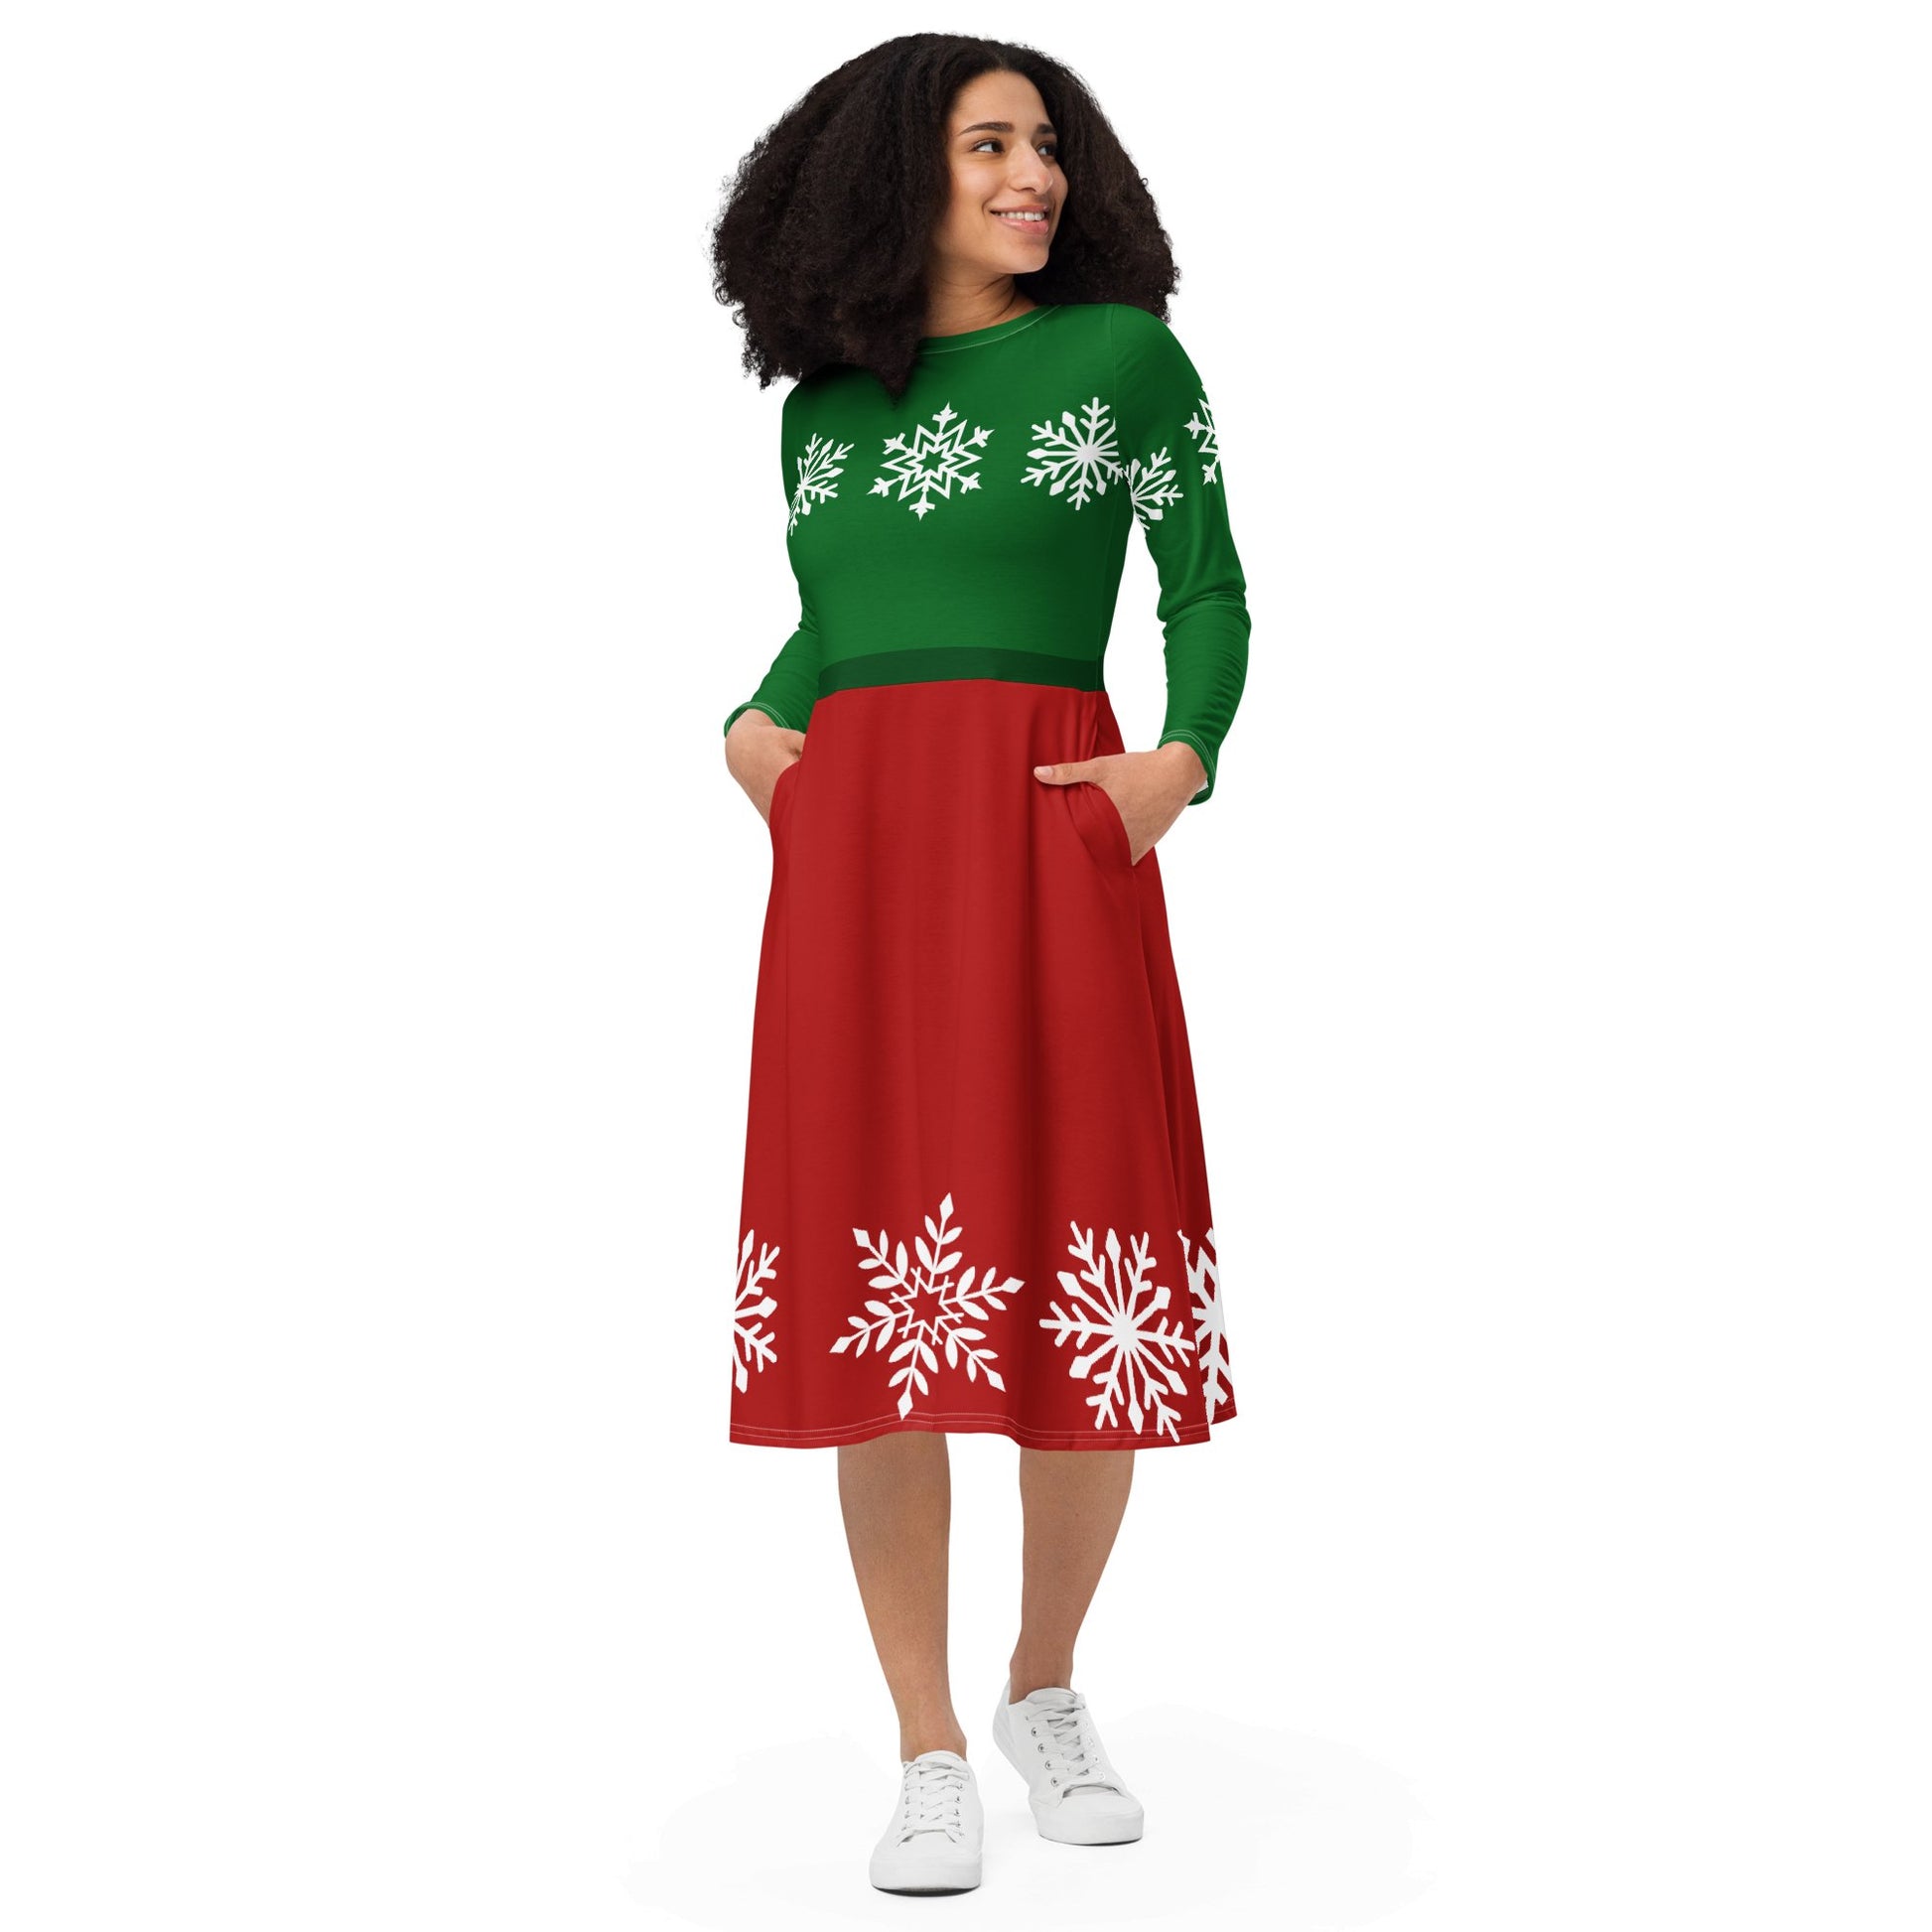 Very Merry Party dress happiness is addictiveWrong Lever Clothing